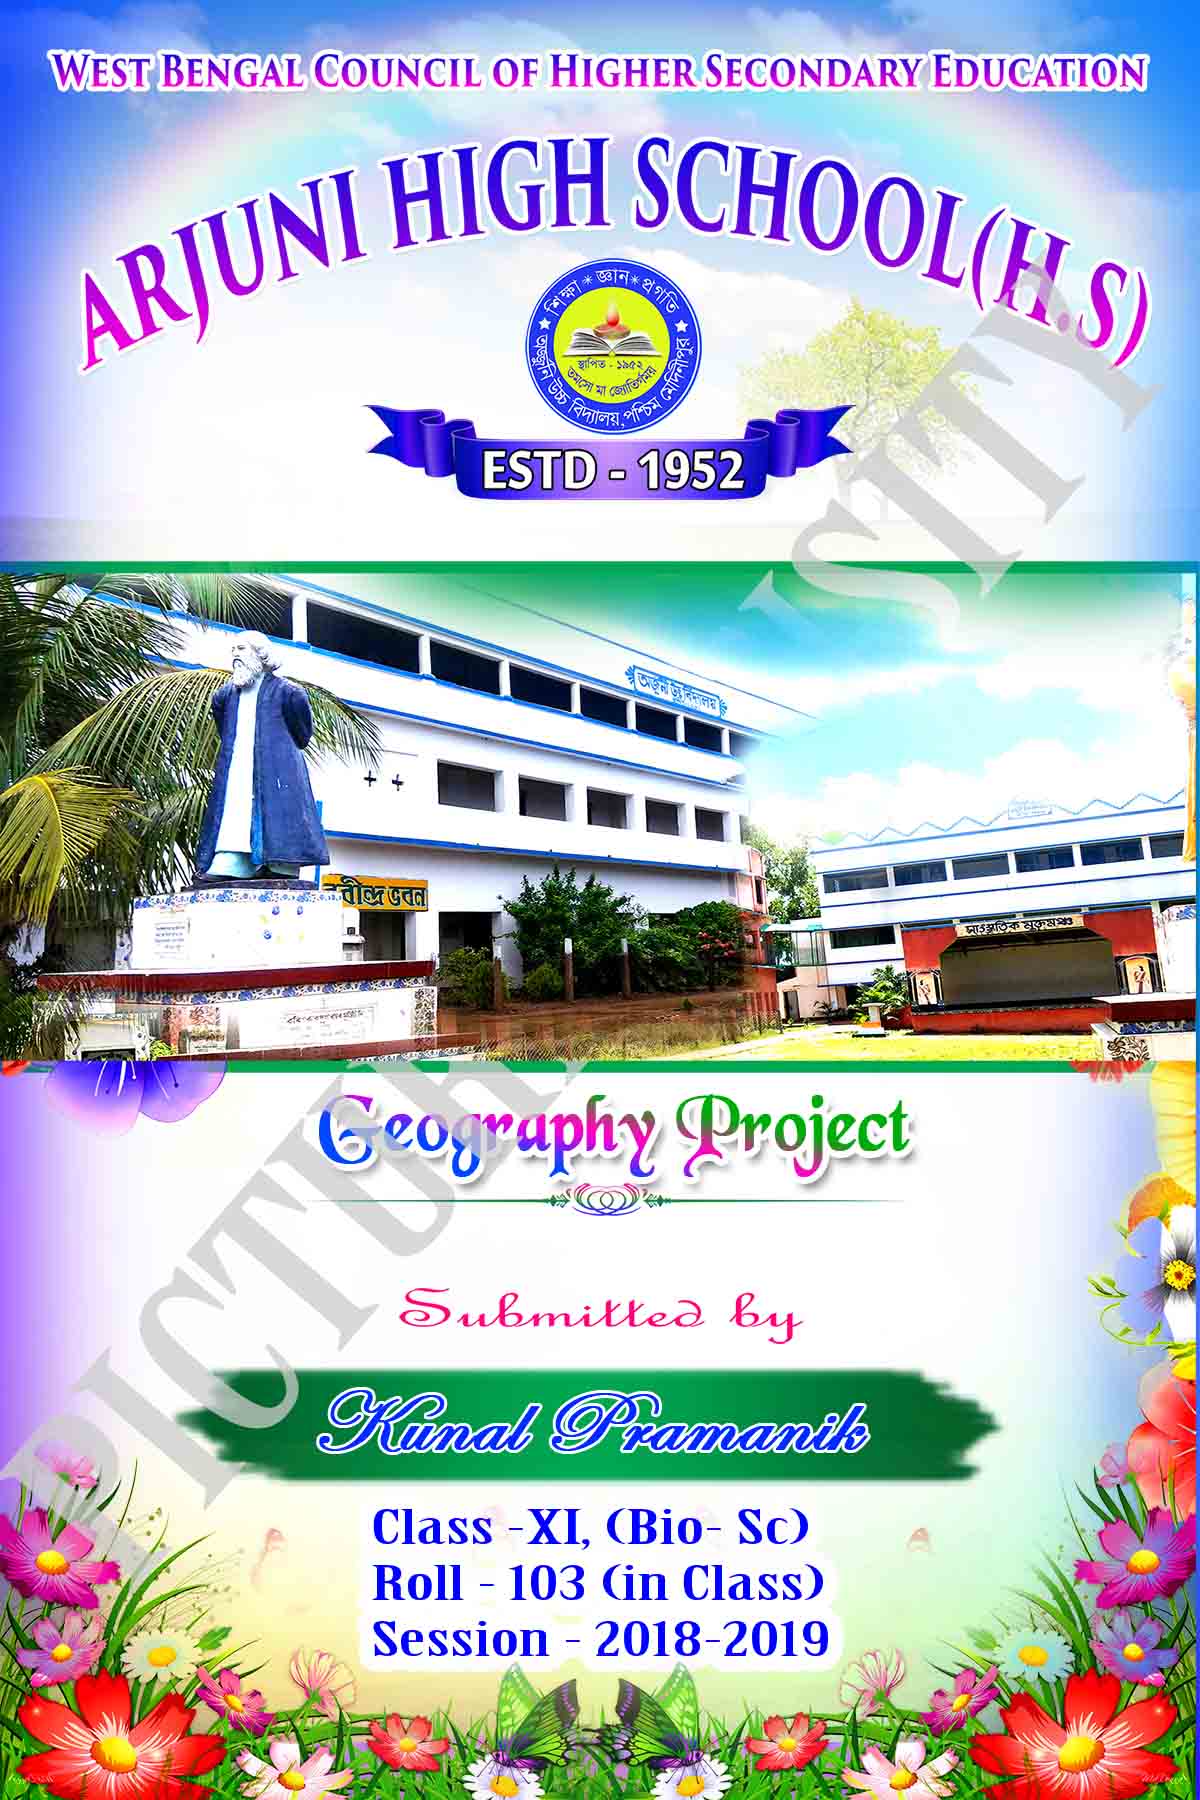 School project front page (Sub_Geography)psd » Picturedensity